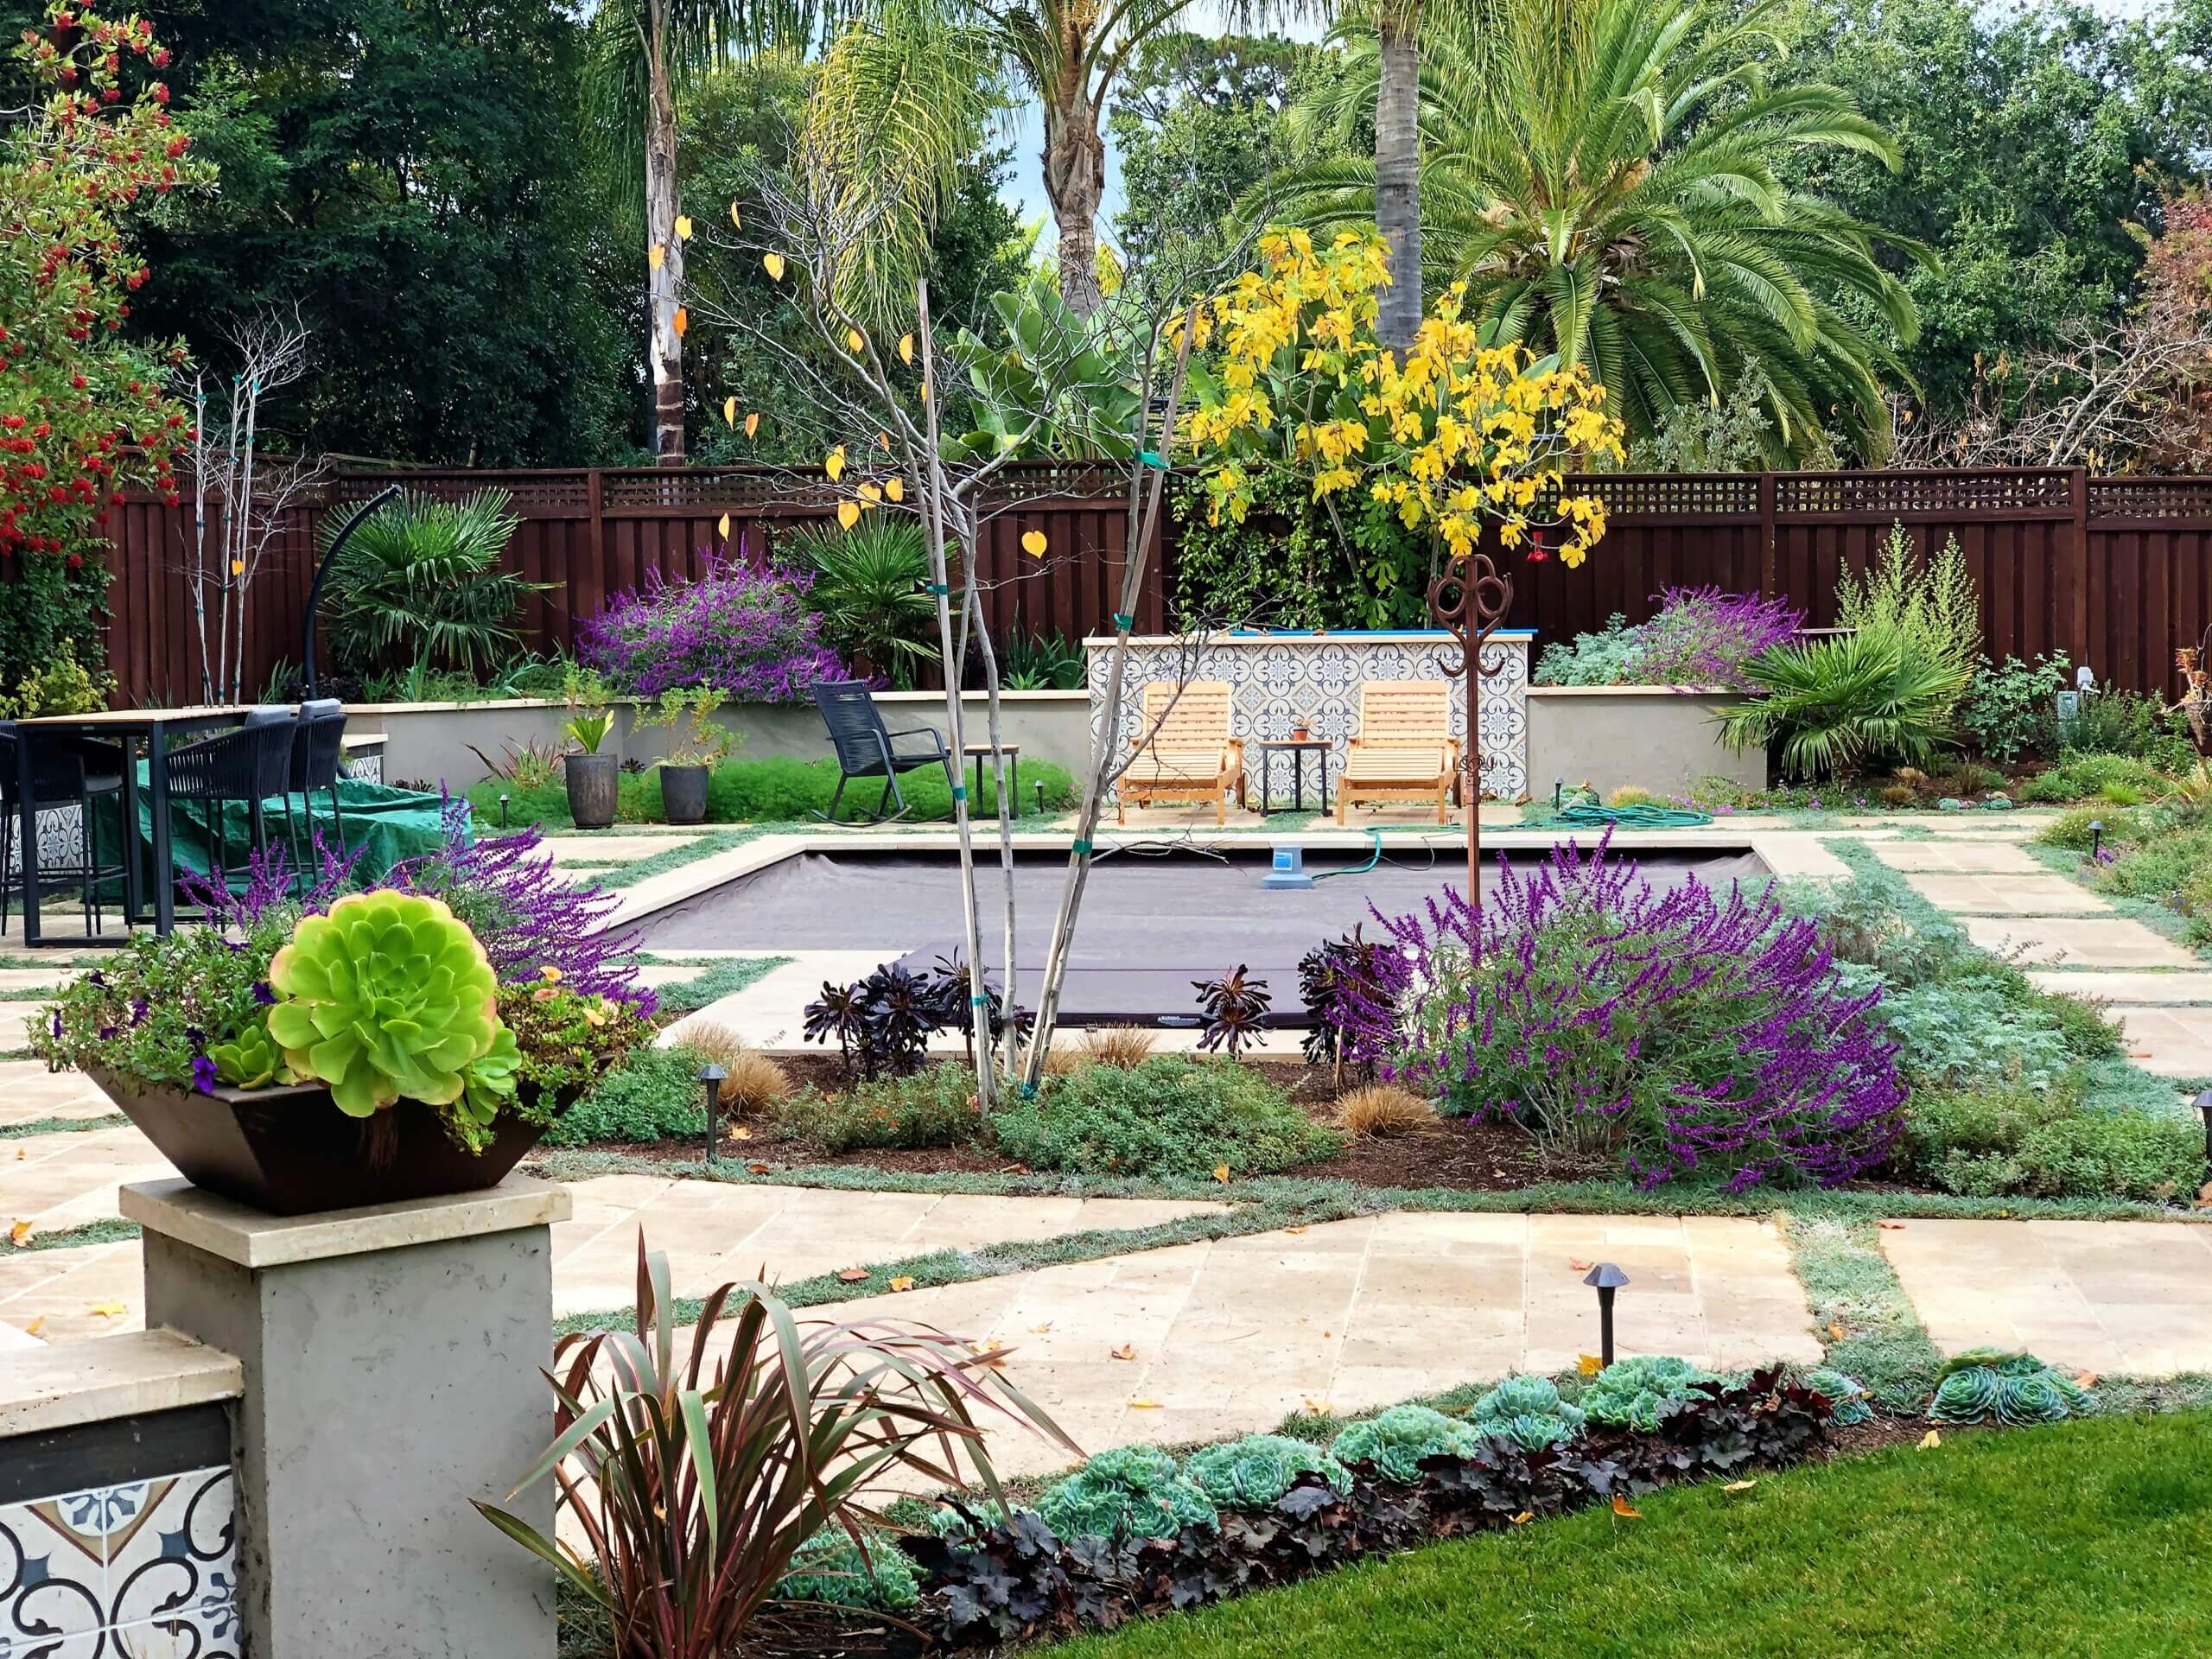 Mediterranean inspired backyard with swimming pool surrounded by lush colorful plantings